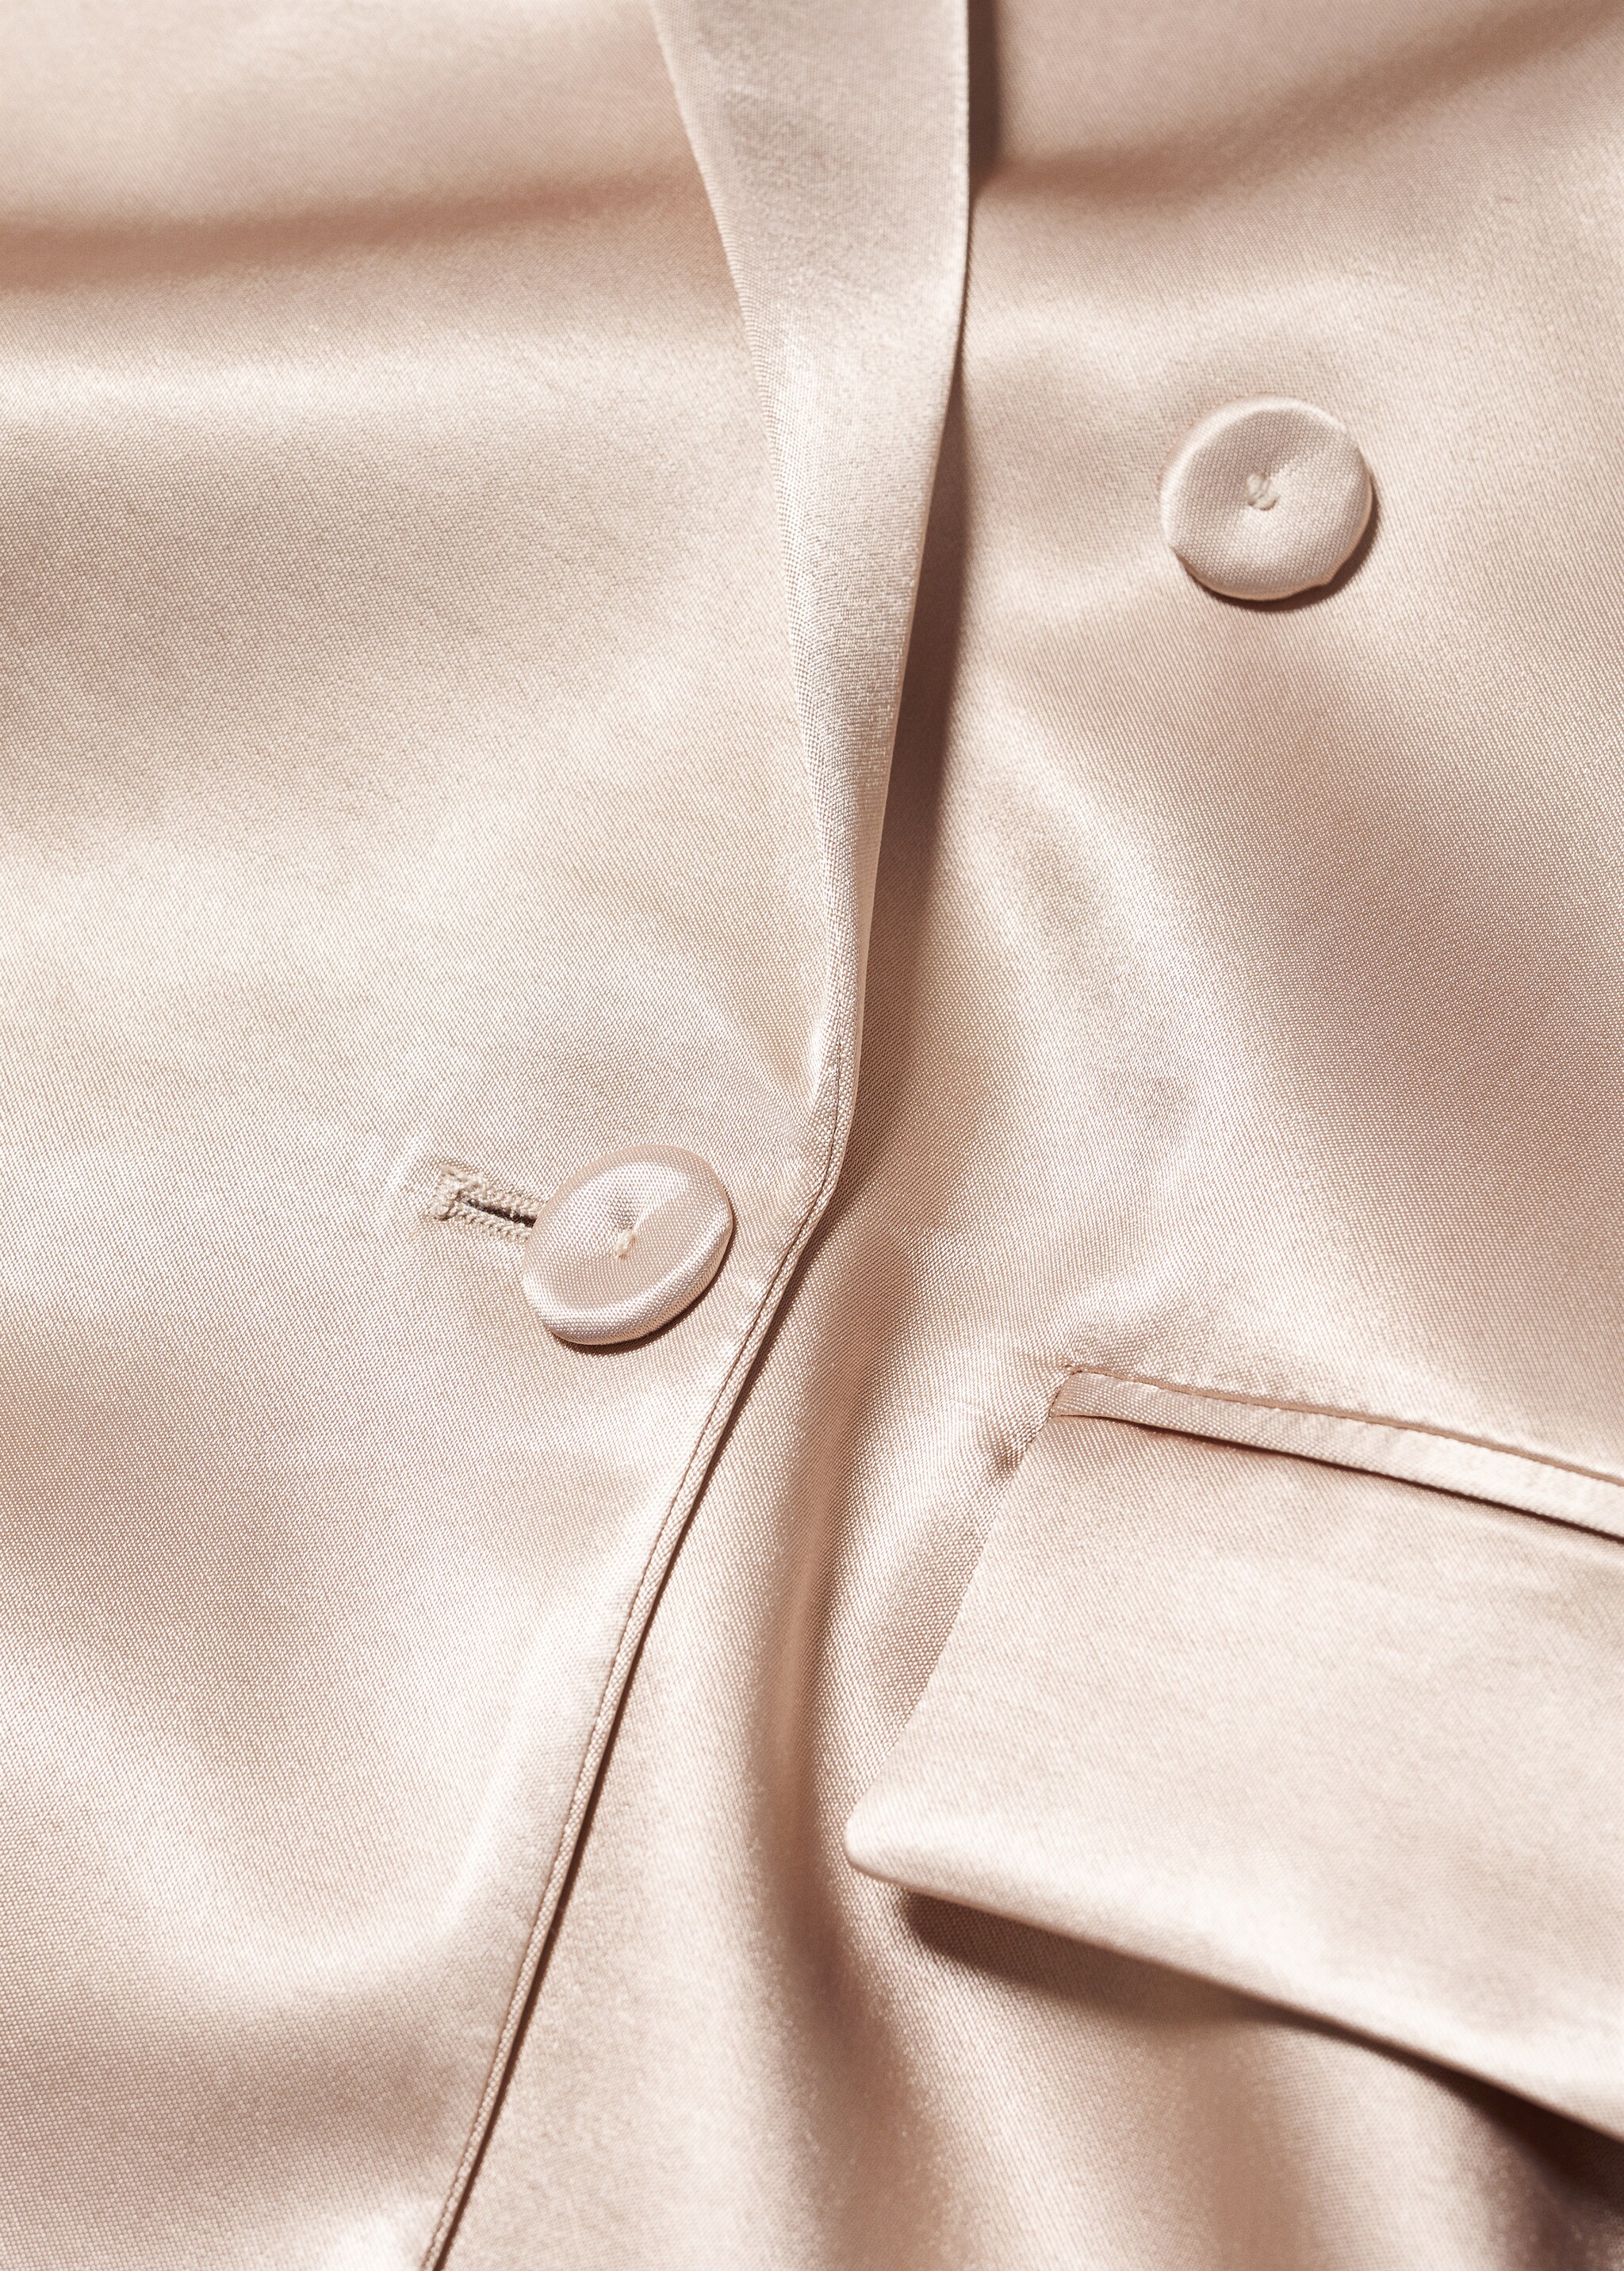 Satin-finish suit jacket - Details of the article 8